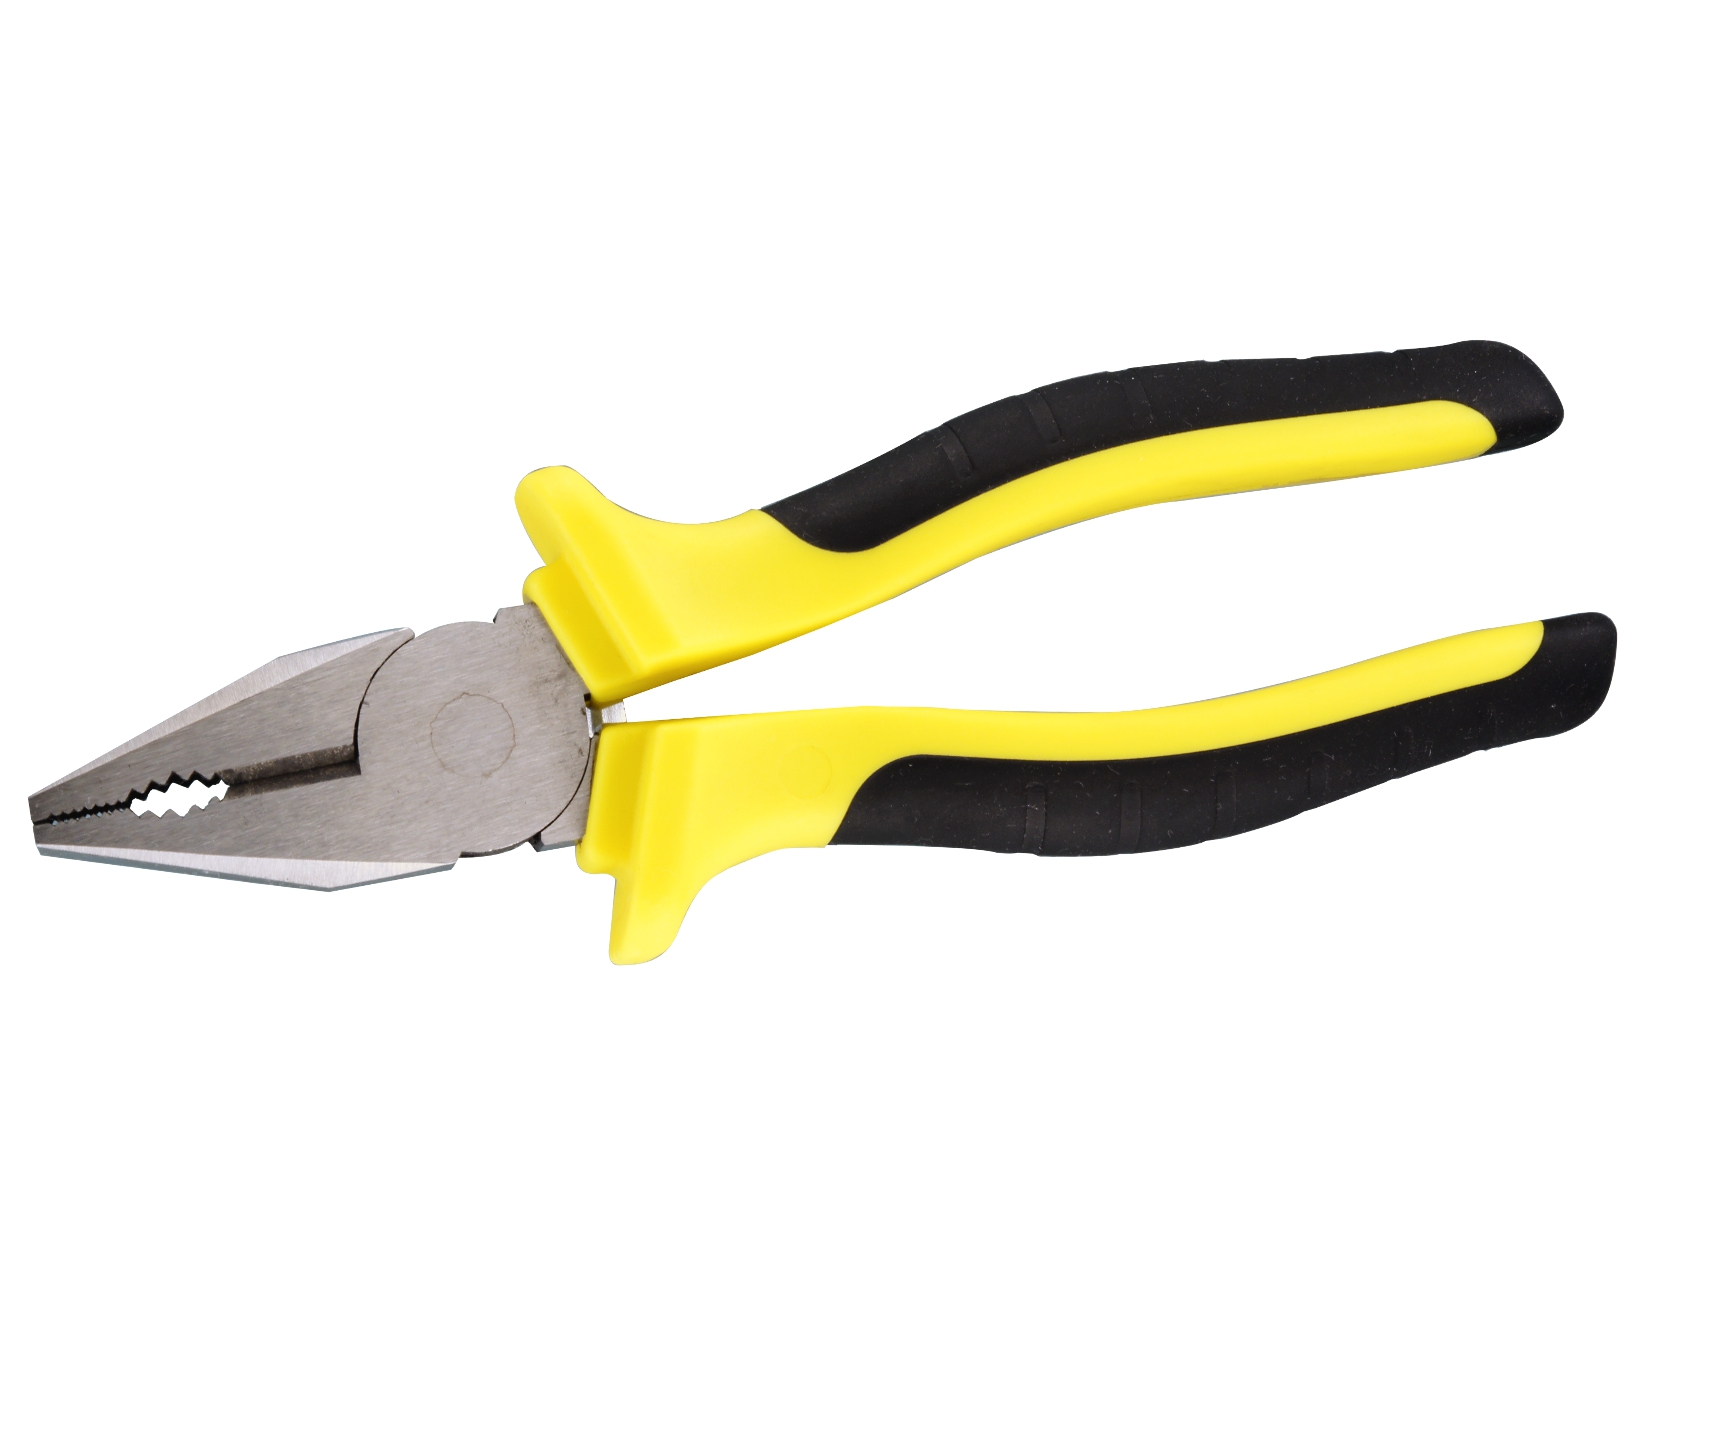 Pliers at Quikr